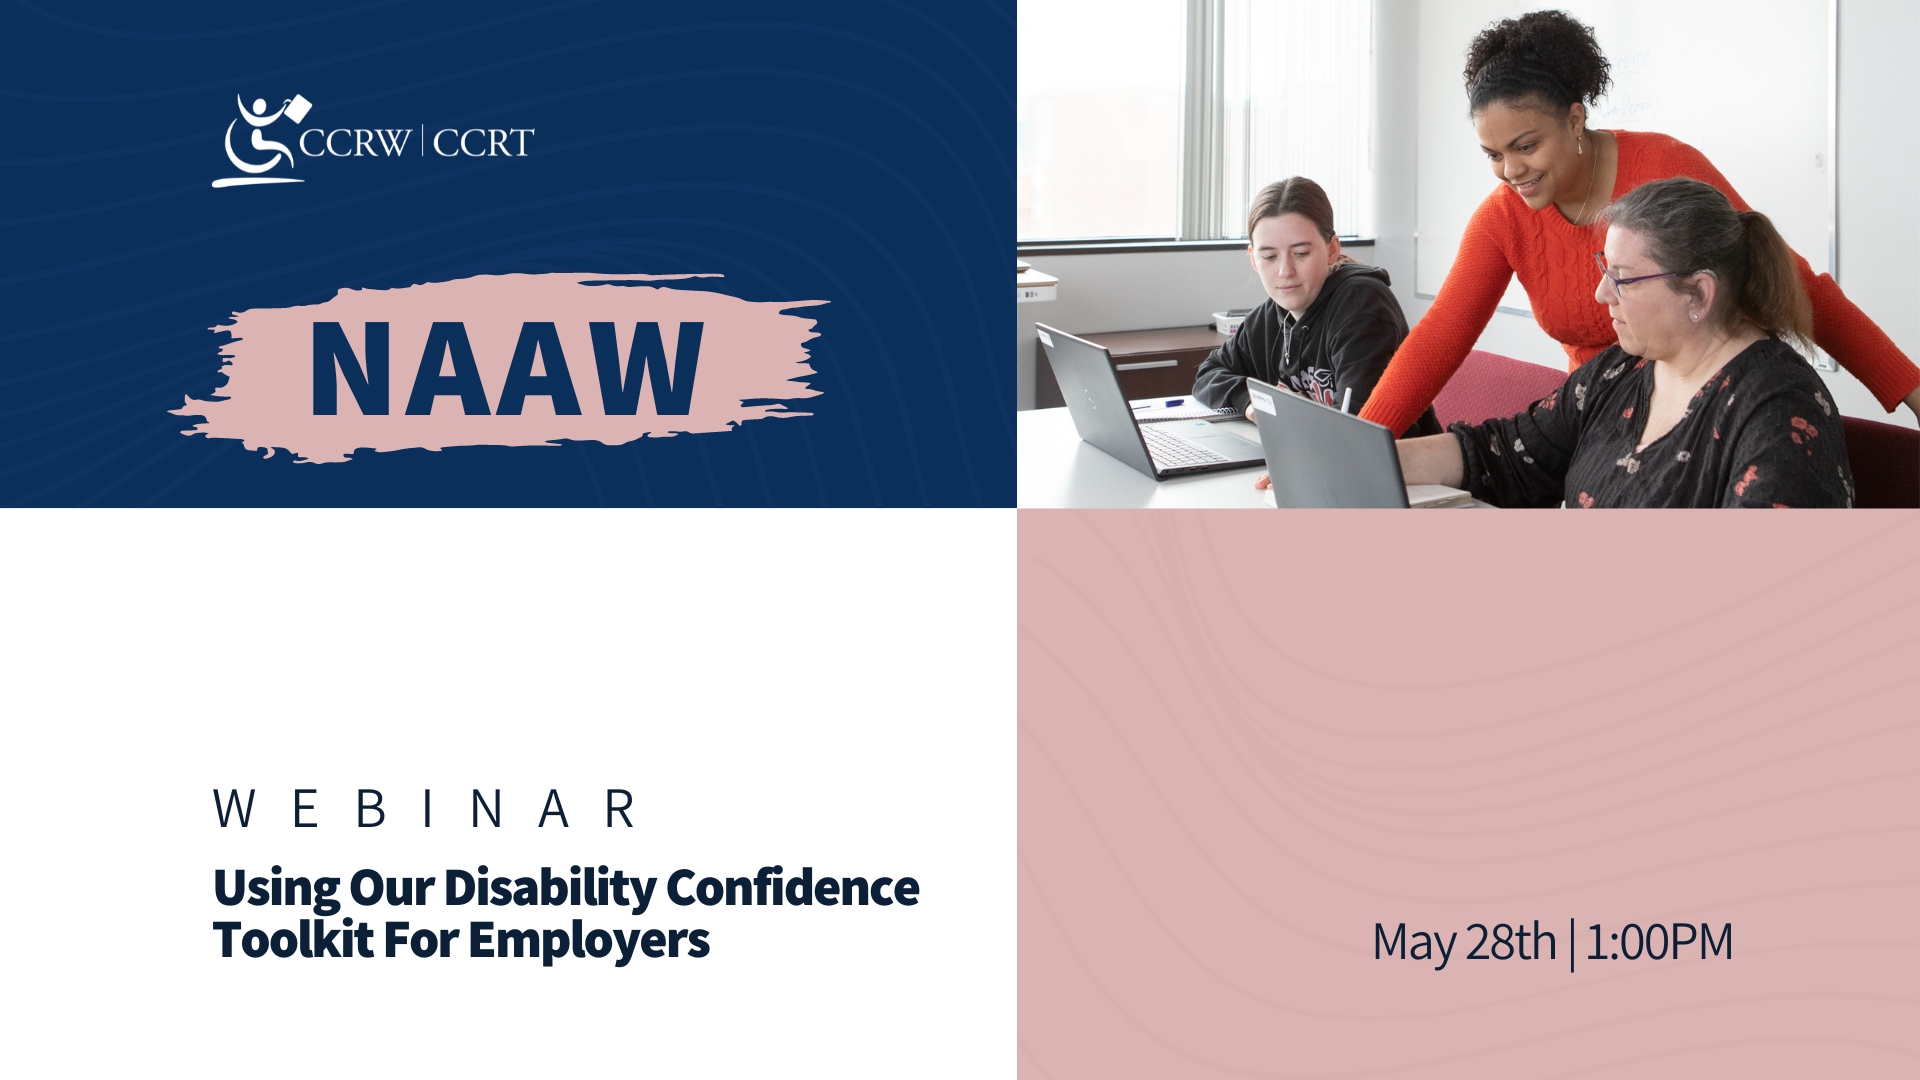 NAAW Webinar: Using Our Disability Confidence Toolkit for Employers